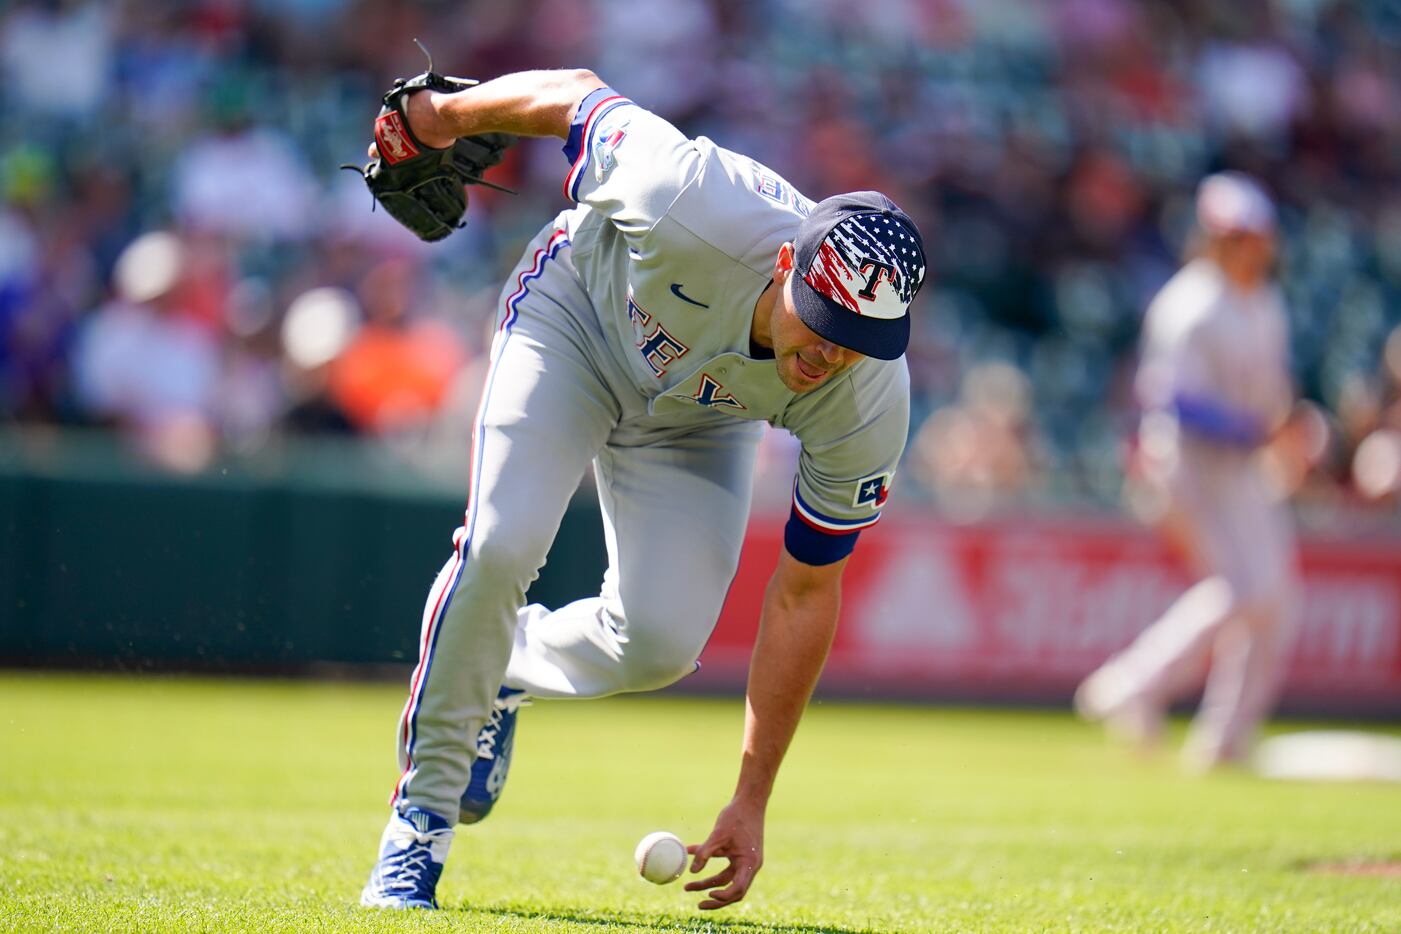 Texas Rangers Blow Another Save, This Time via Walk-Off HBP - The Forkball